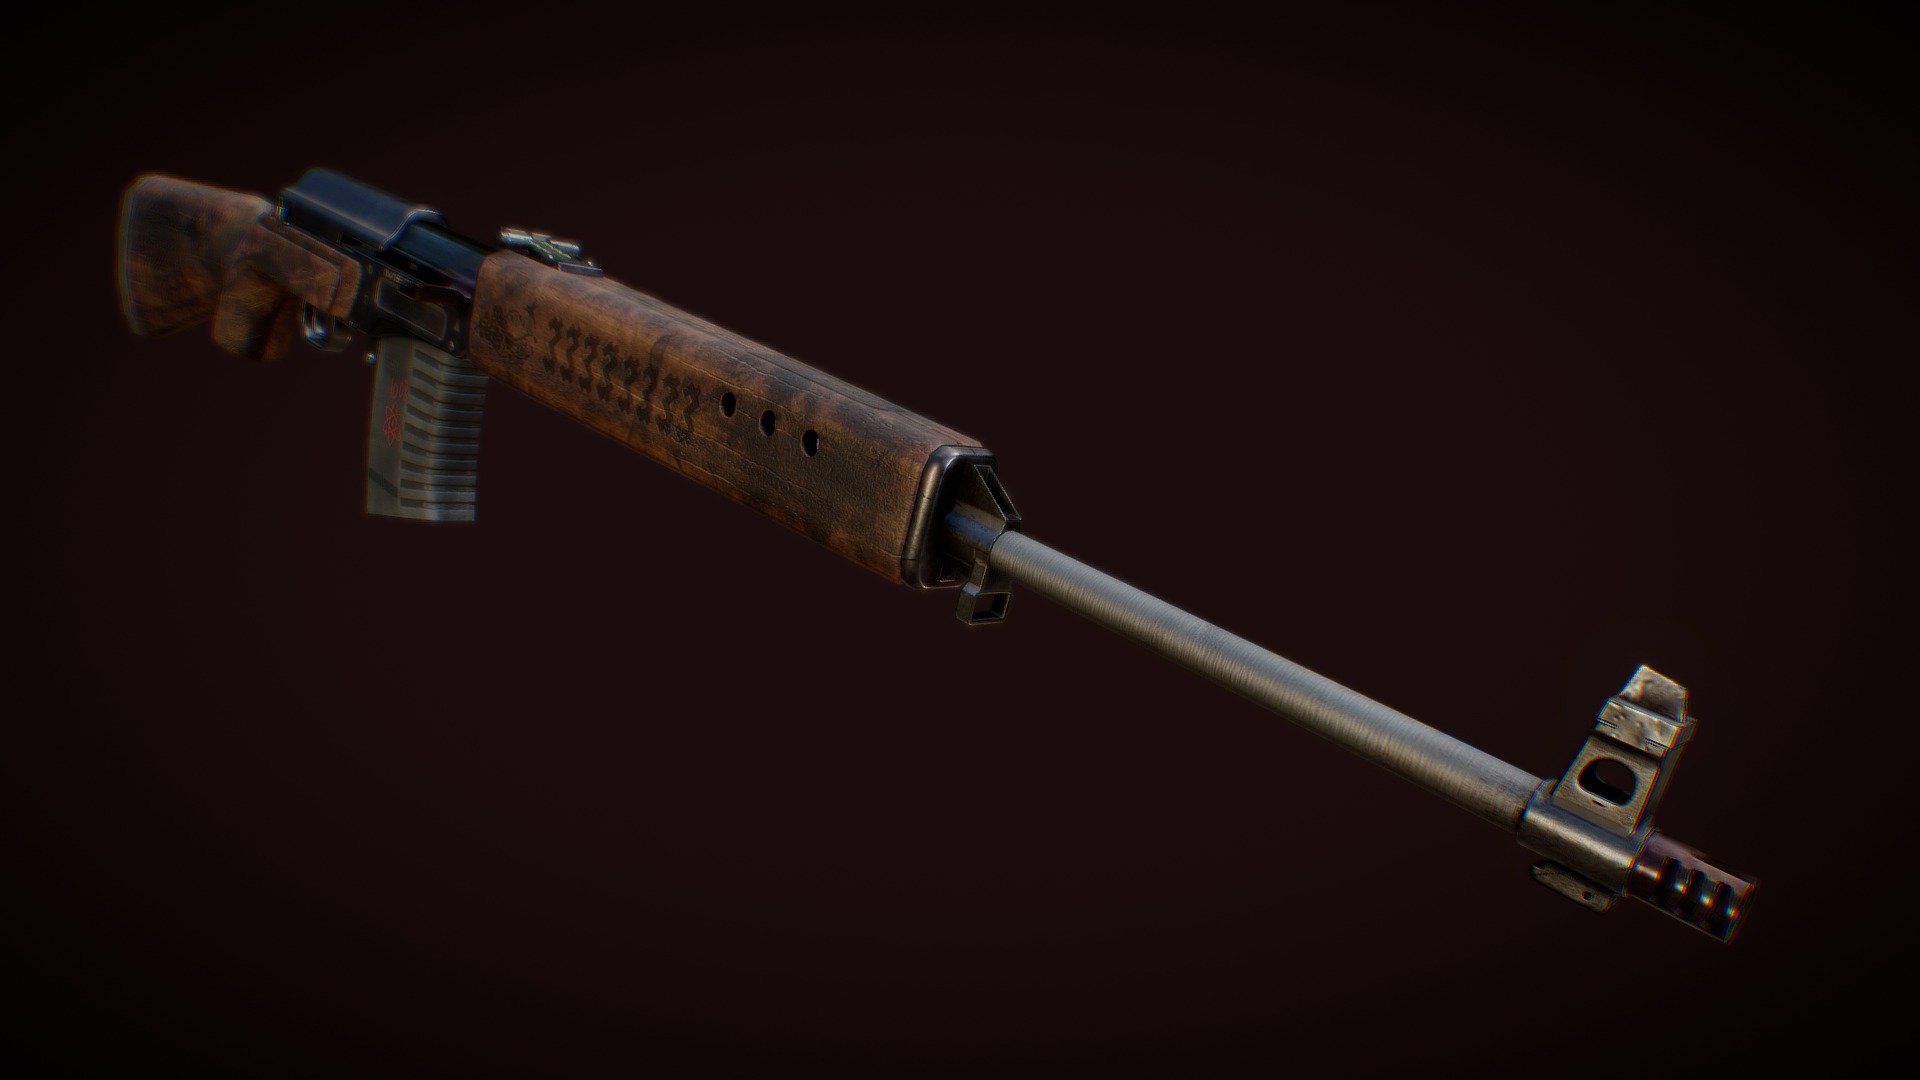 Old soviet 9mm rifle
4096 pbr textures. 
Personal project.
my artstation
Free download - "Медведь"/Bear rifle - Download Free 3D model by Yksnawel 3d model